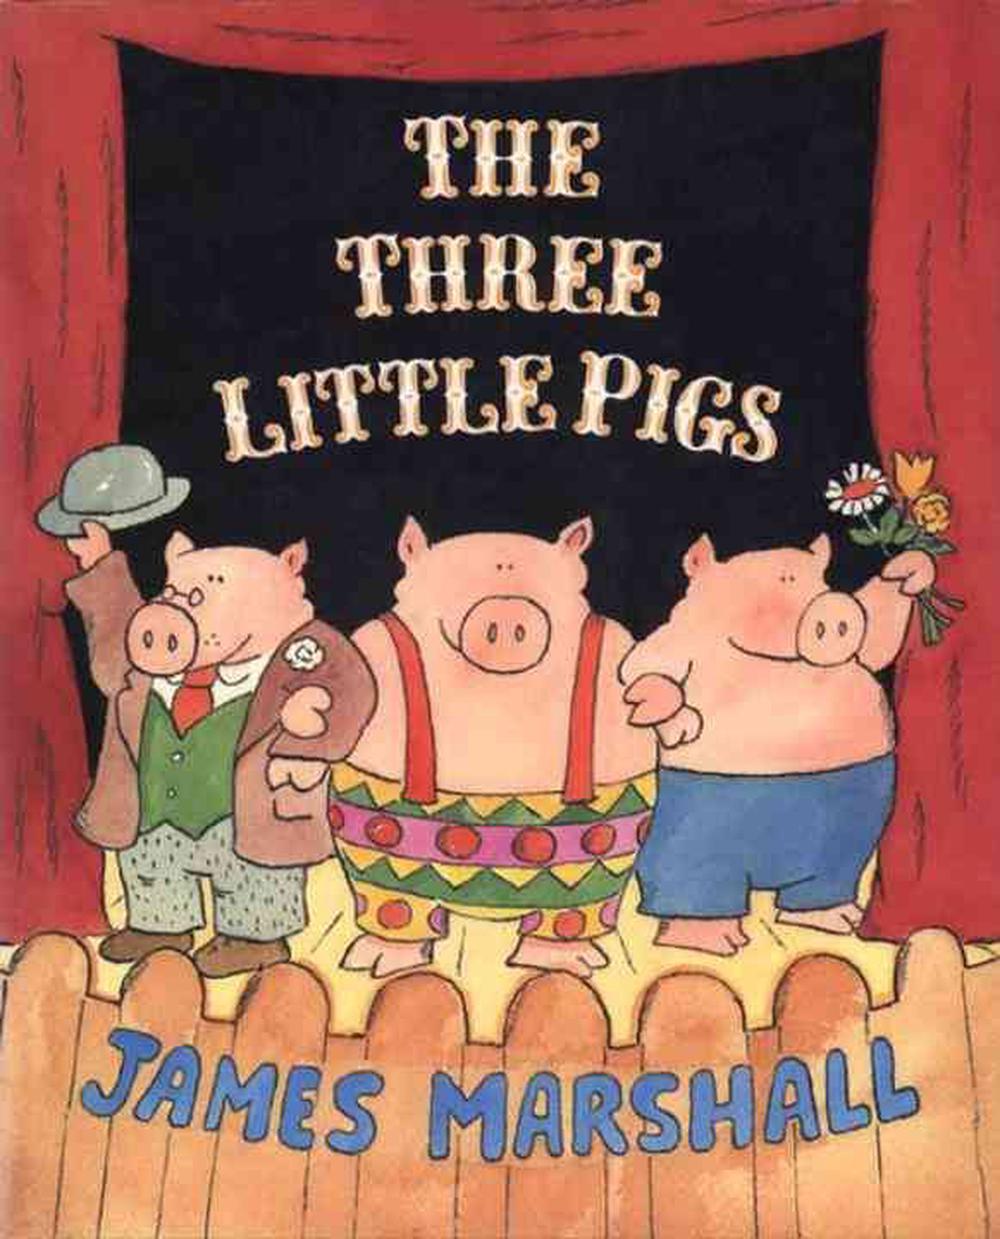 the three little pigs by james marshall read aloud